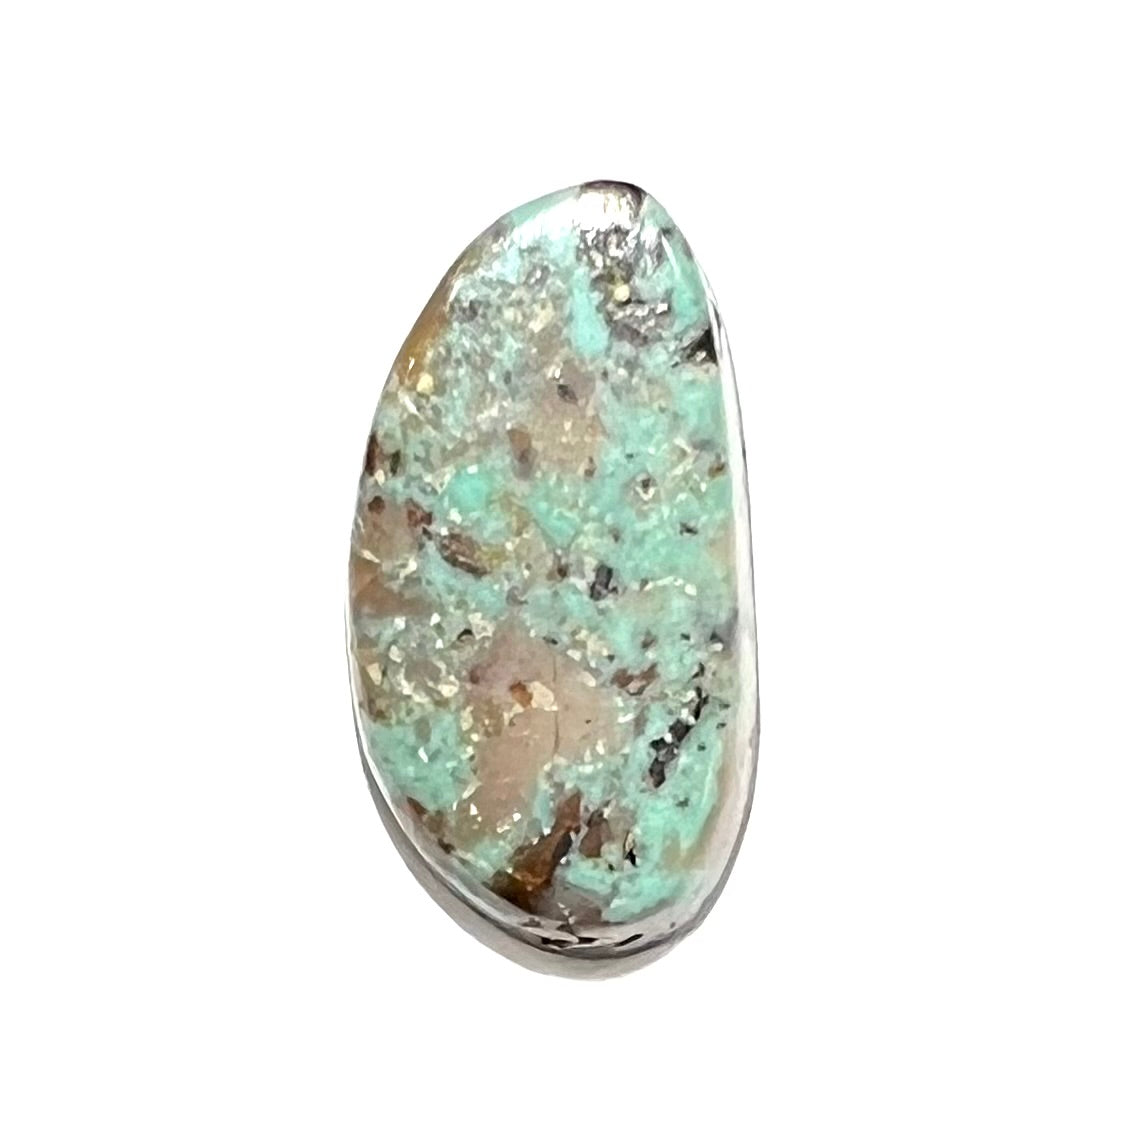 A freeform cabochon cut Valley Blue turquoise stone from Lander County, Nevada.